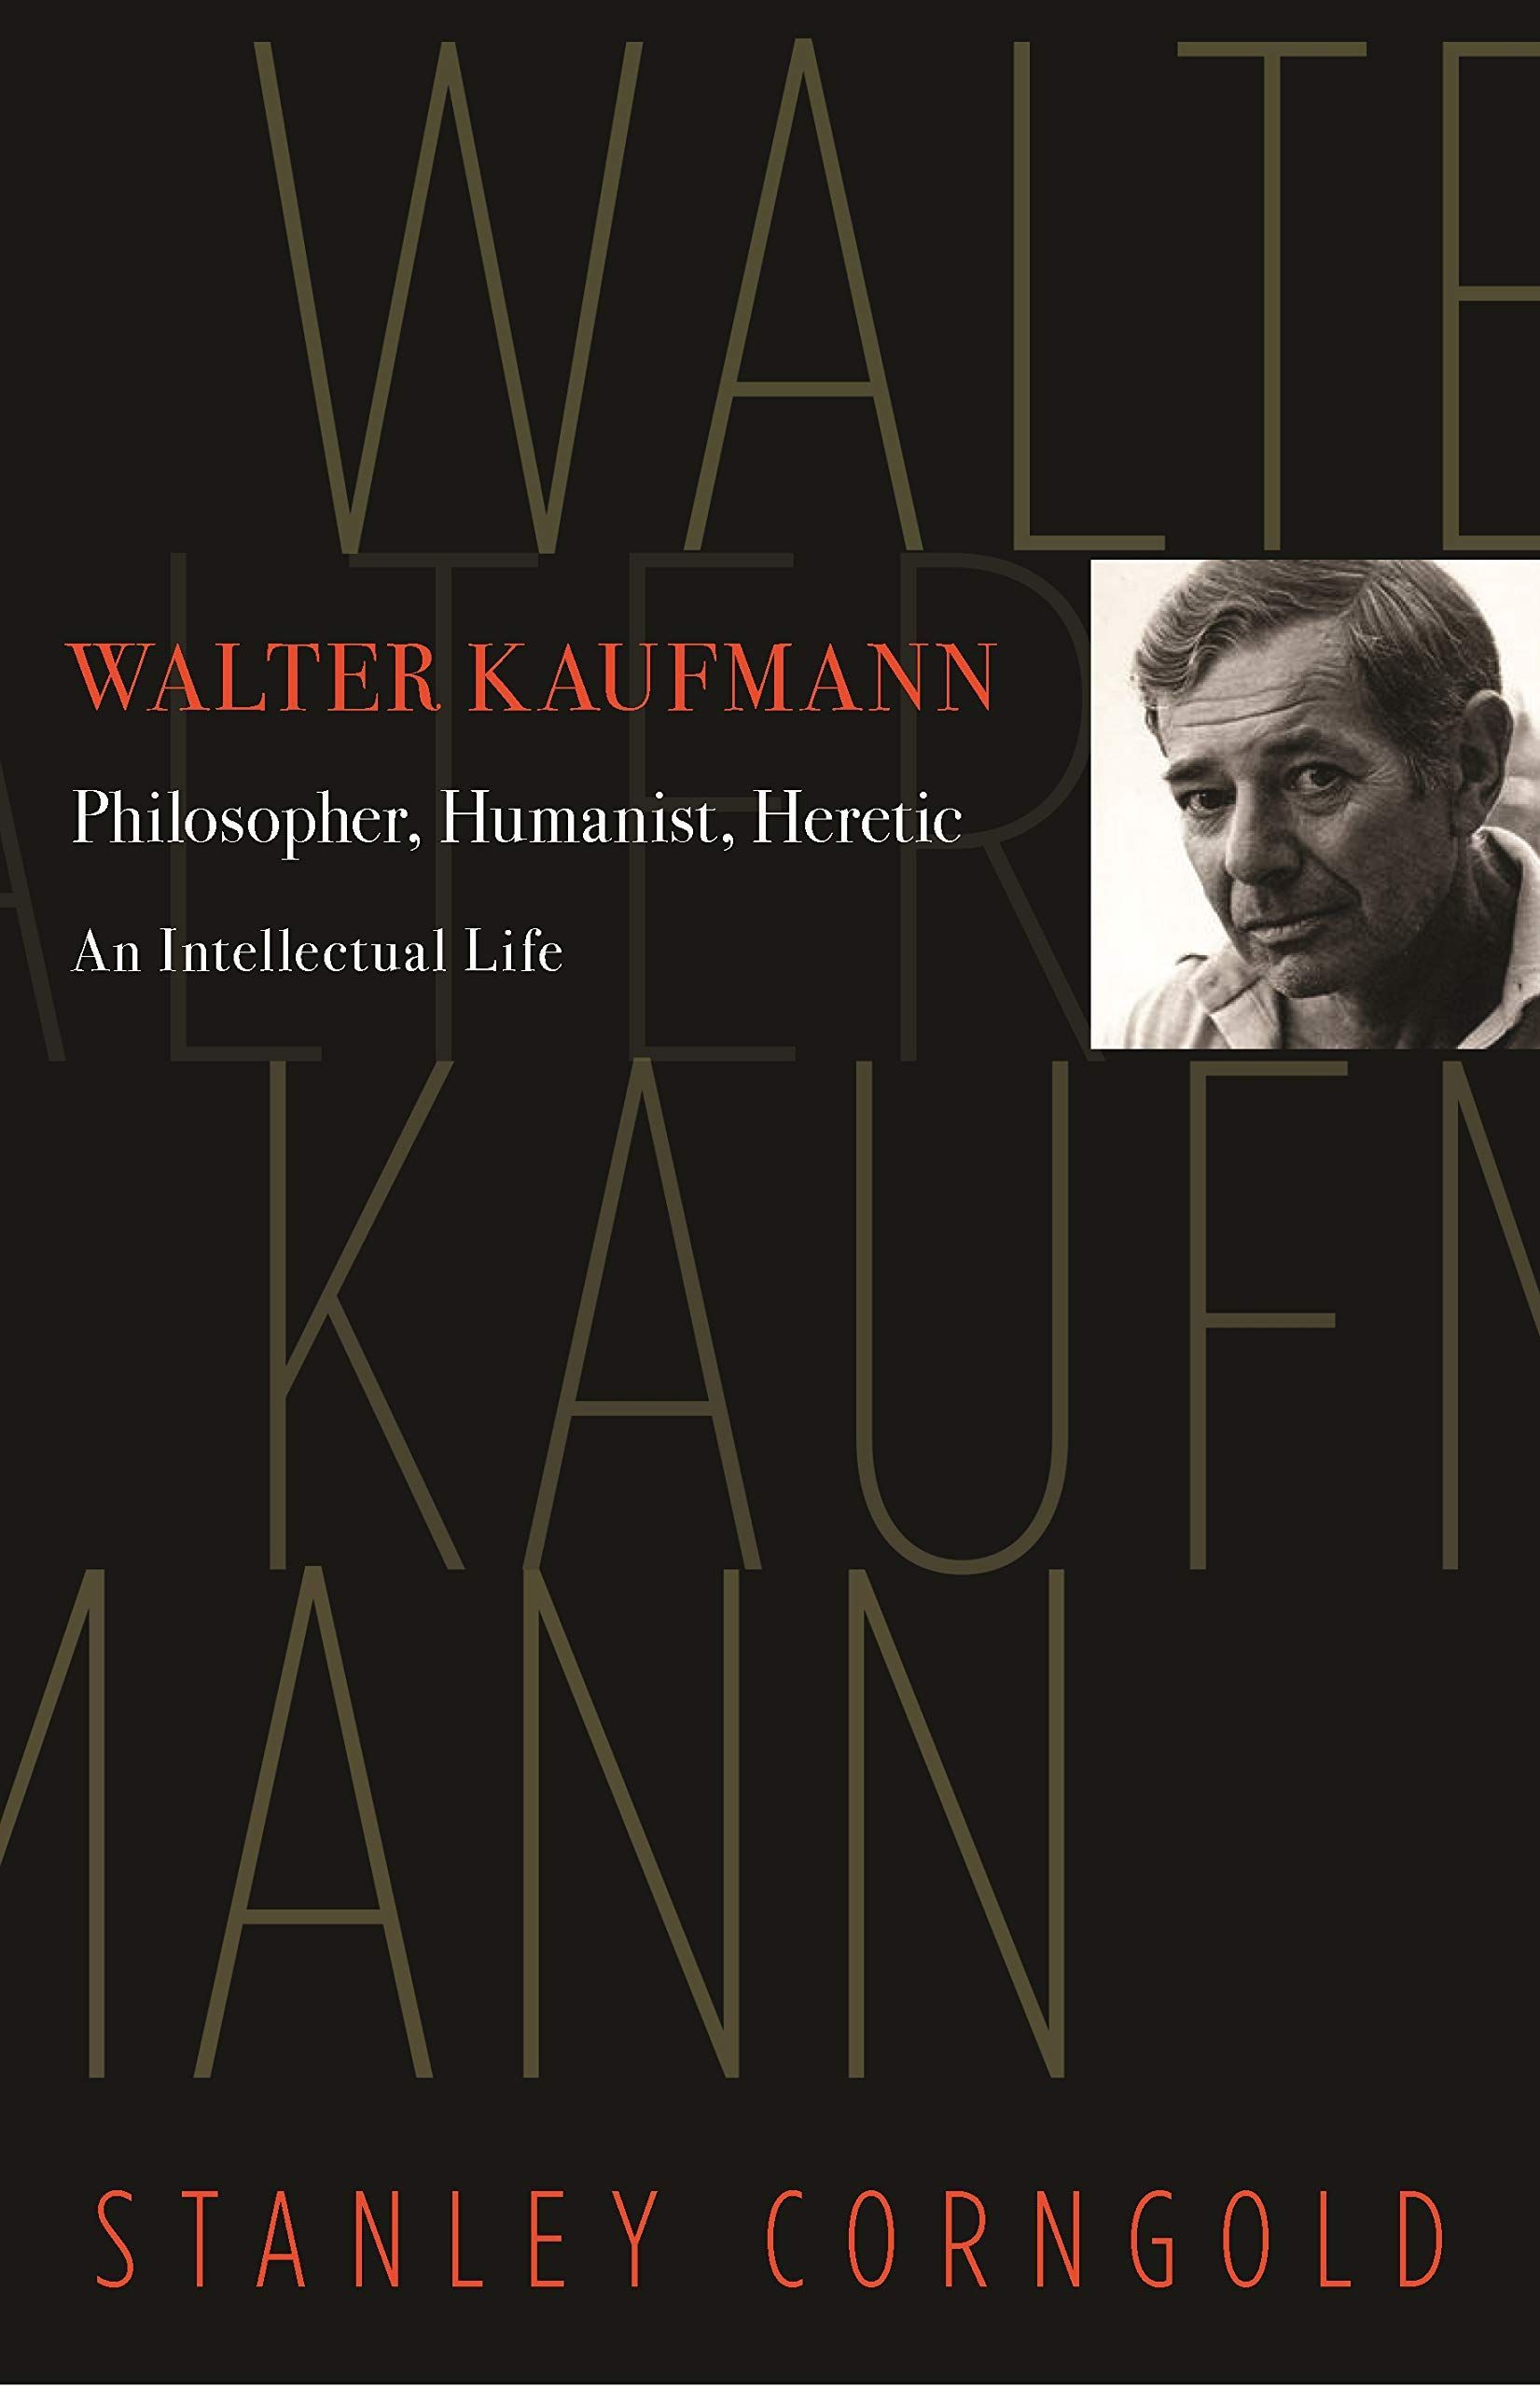 Left for Dead: On the Philosophical Life and Vocation of Walter Kaufmann